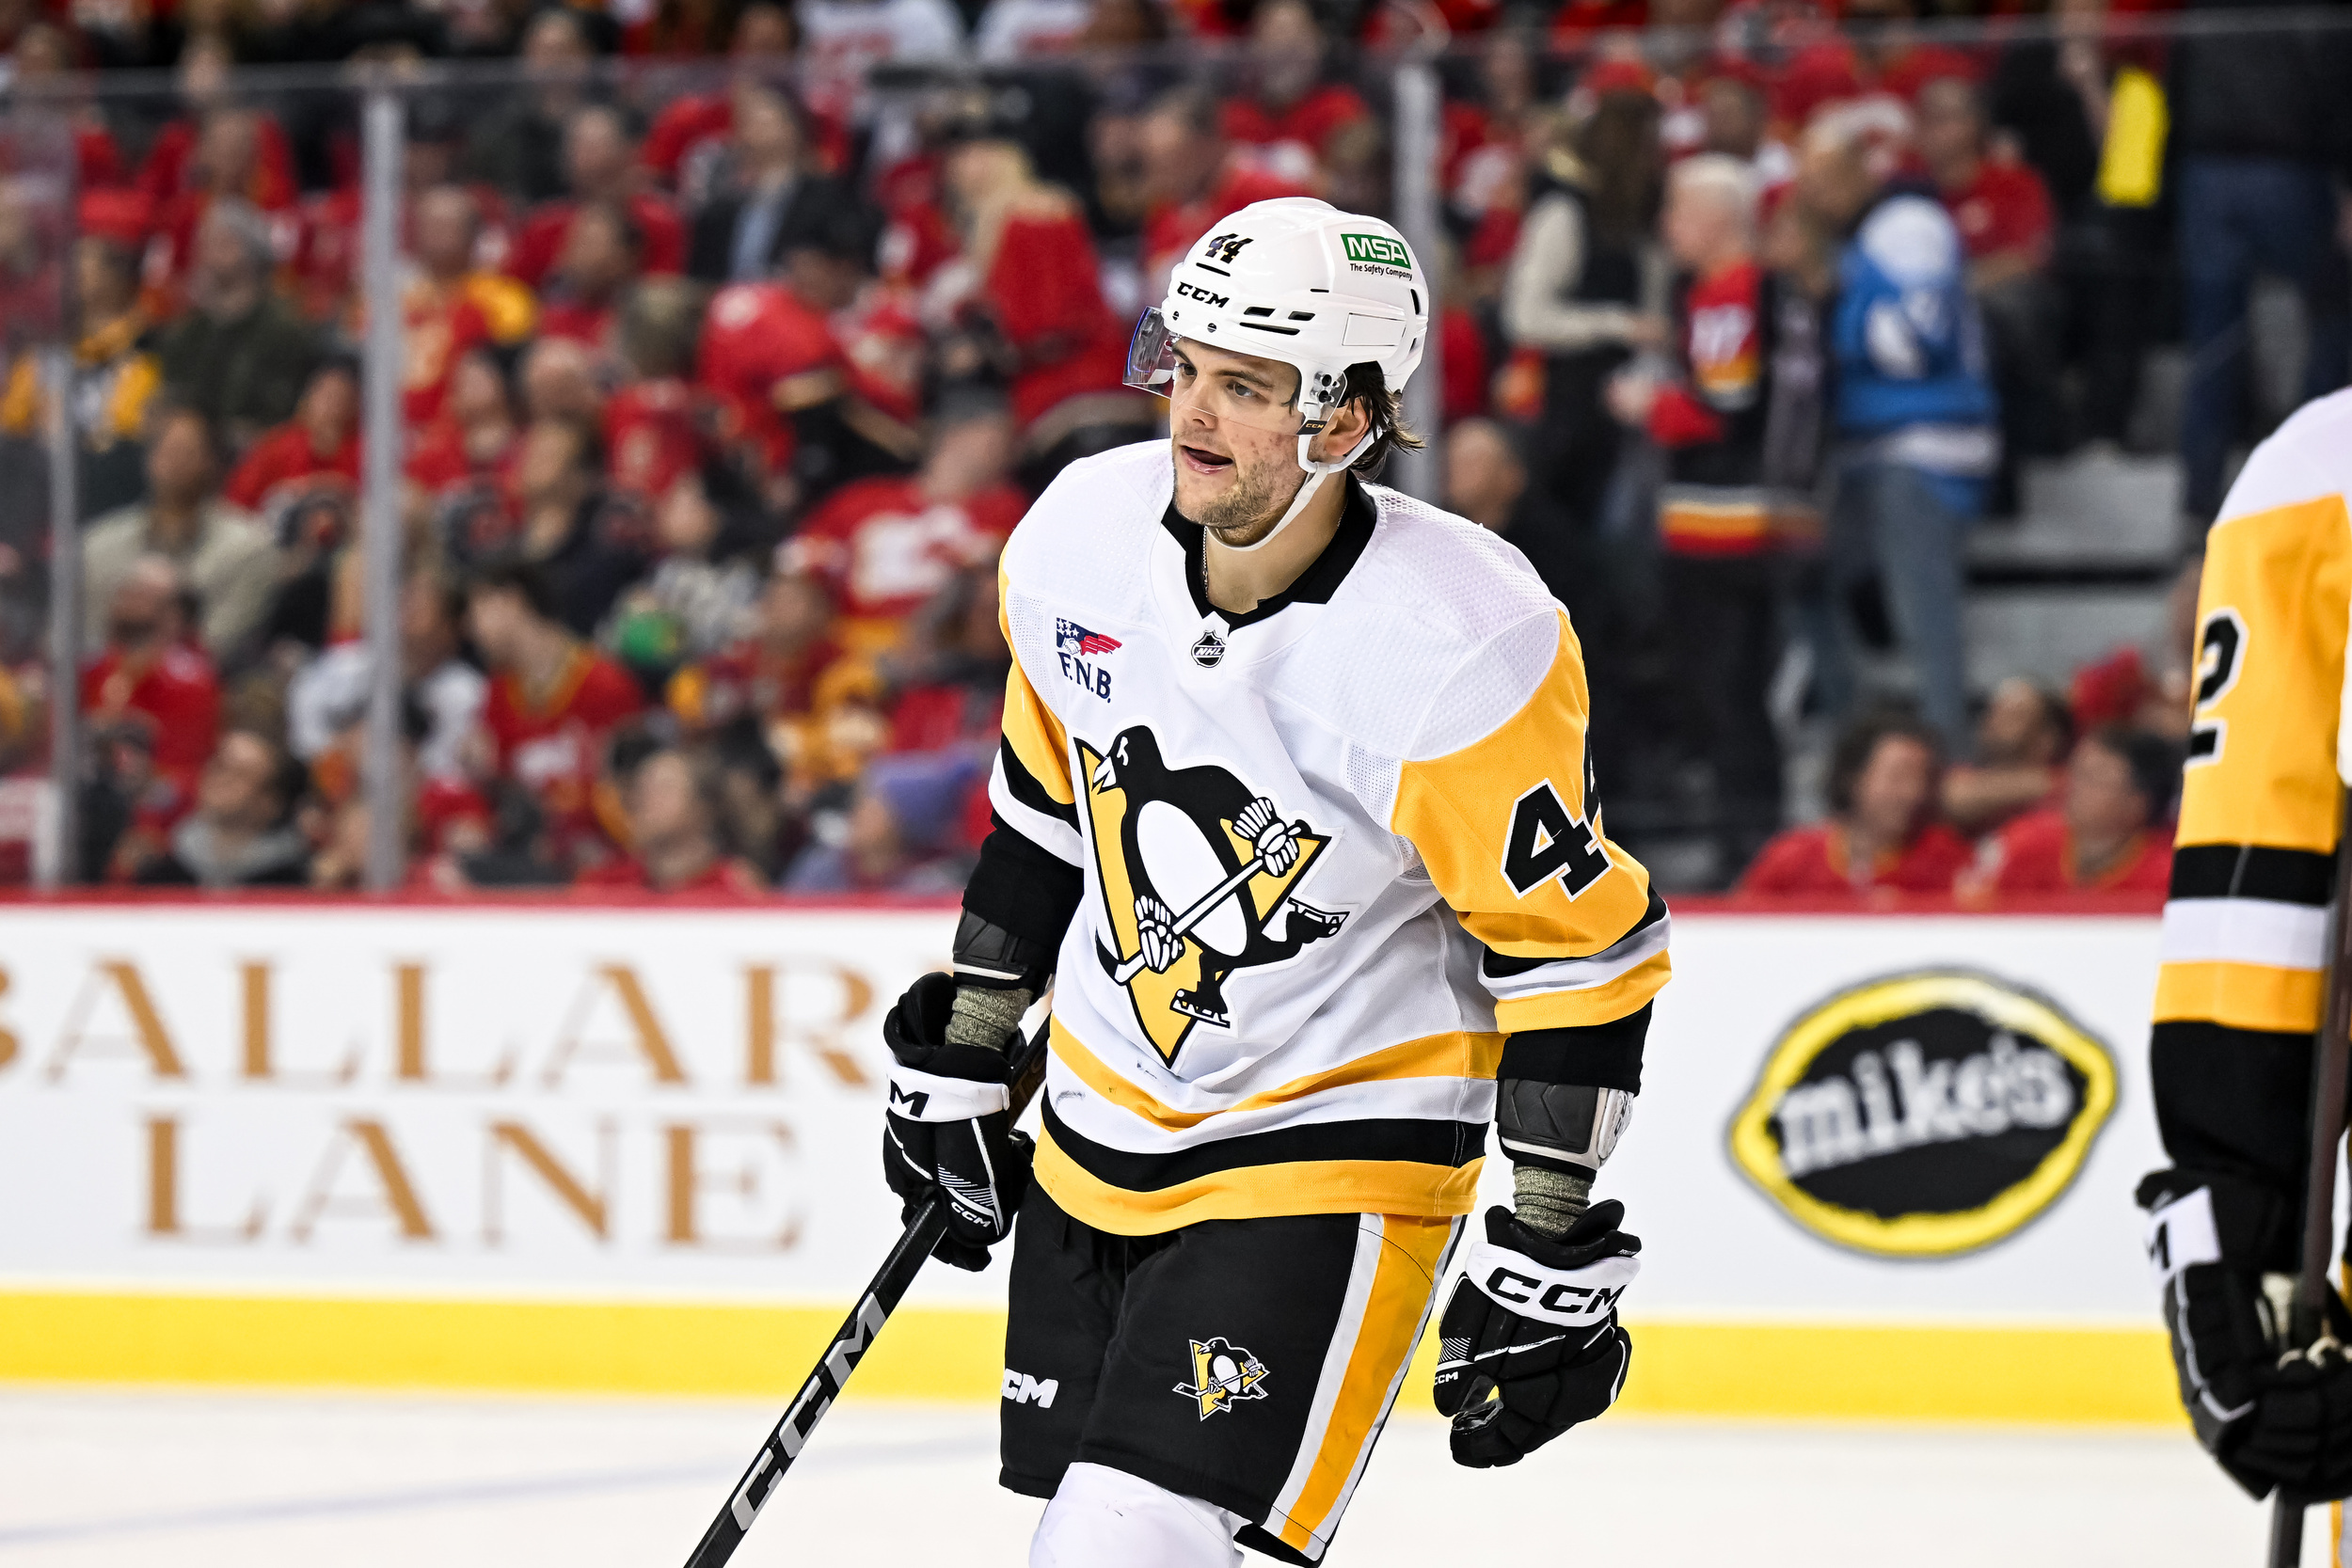 penguins recall young forward for eighth time this season